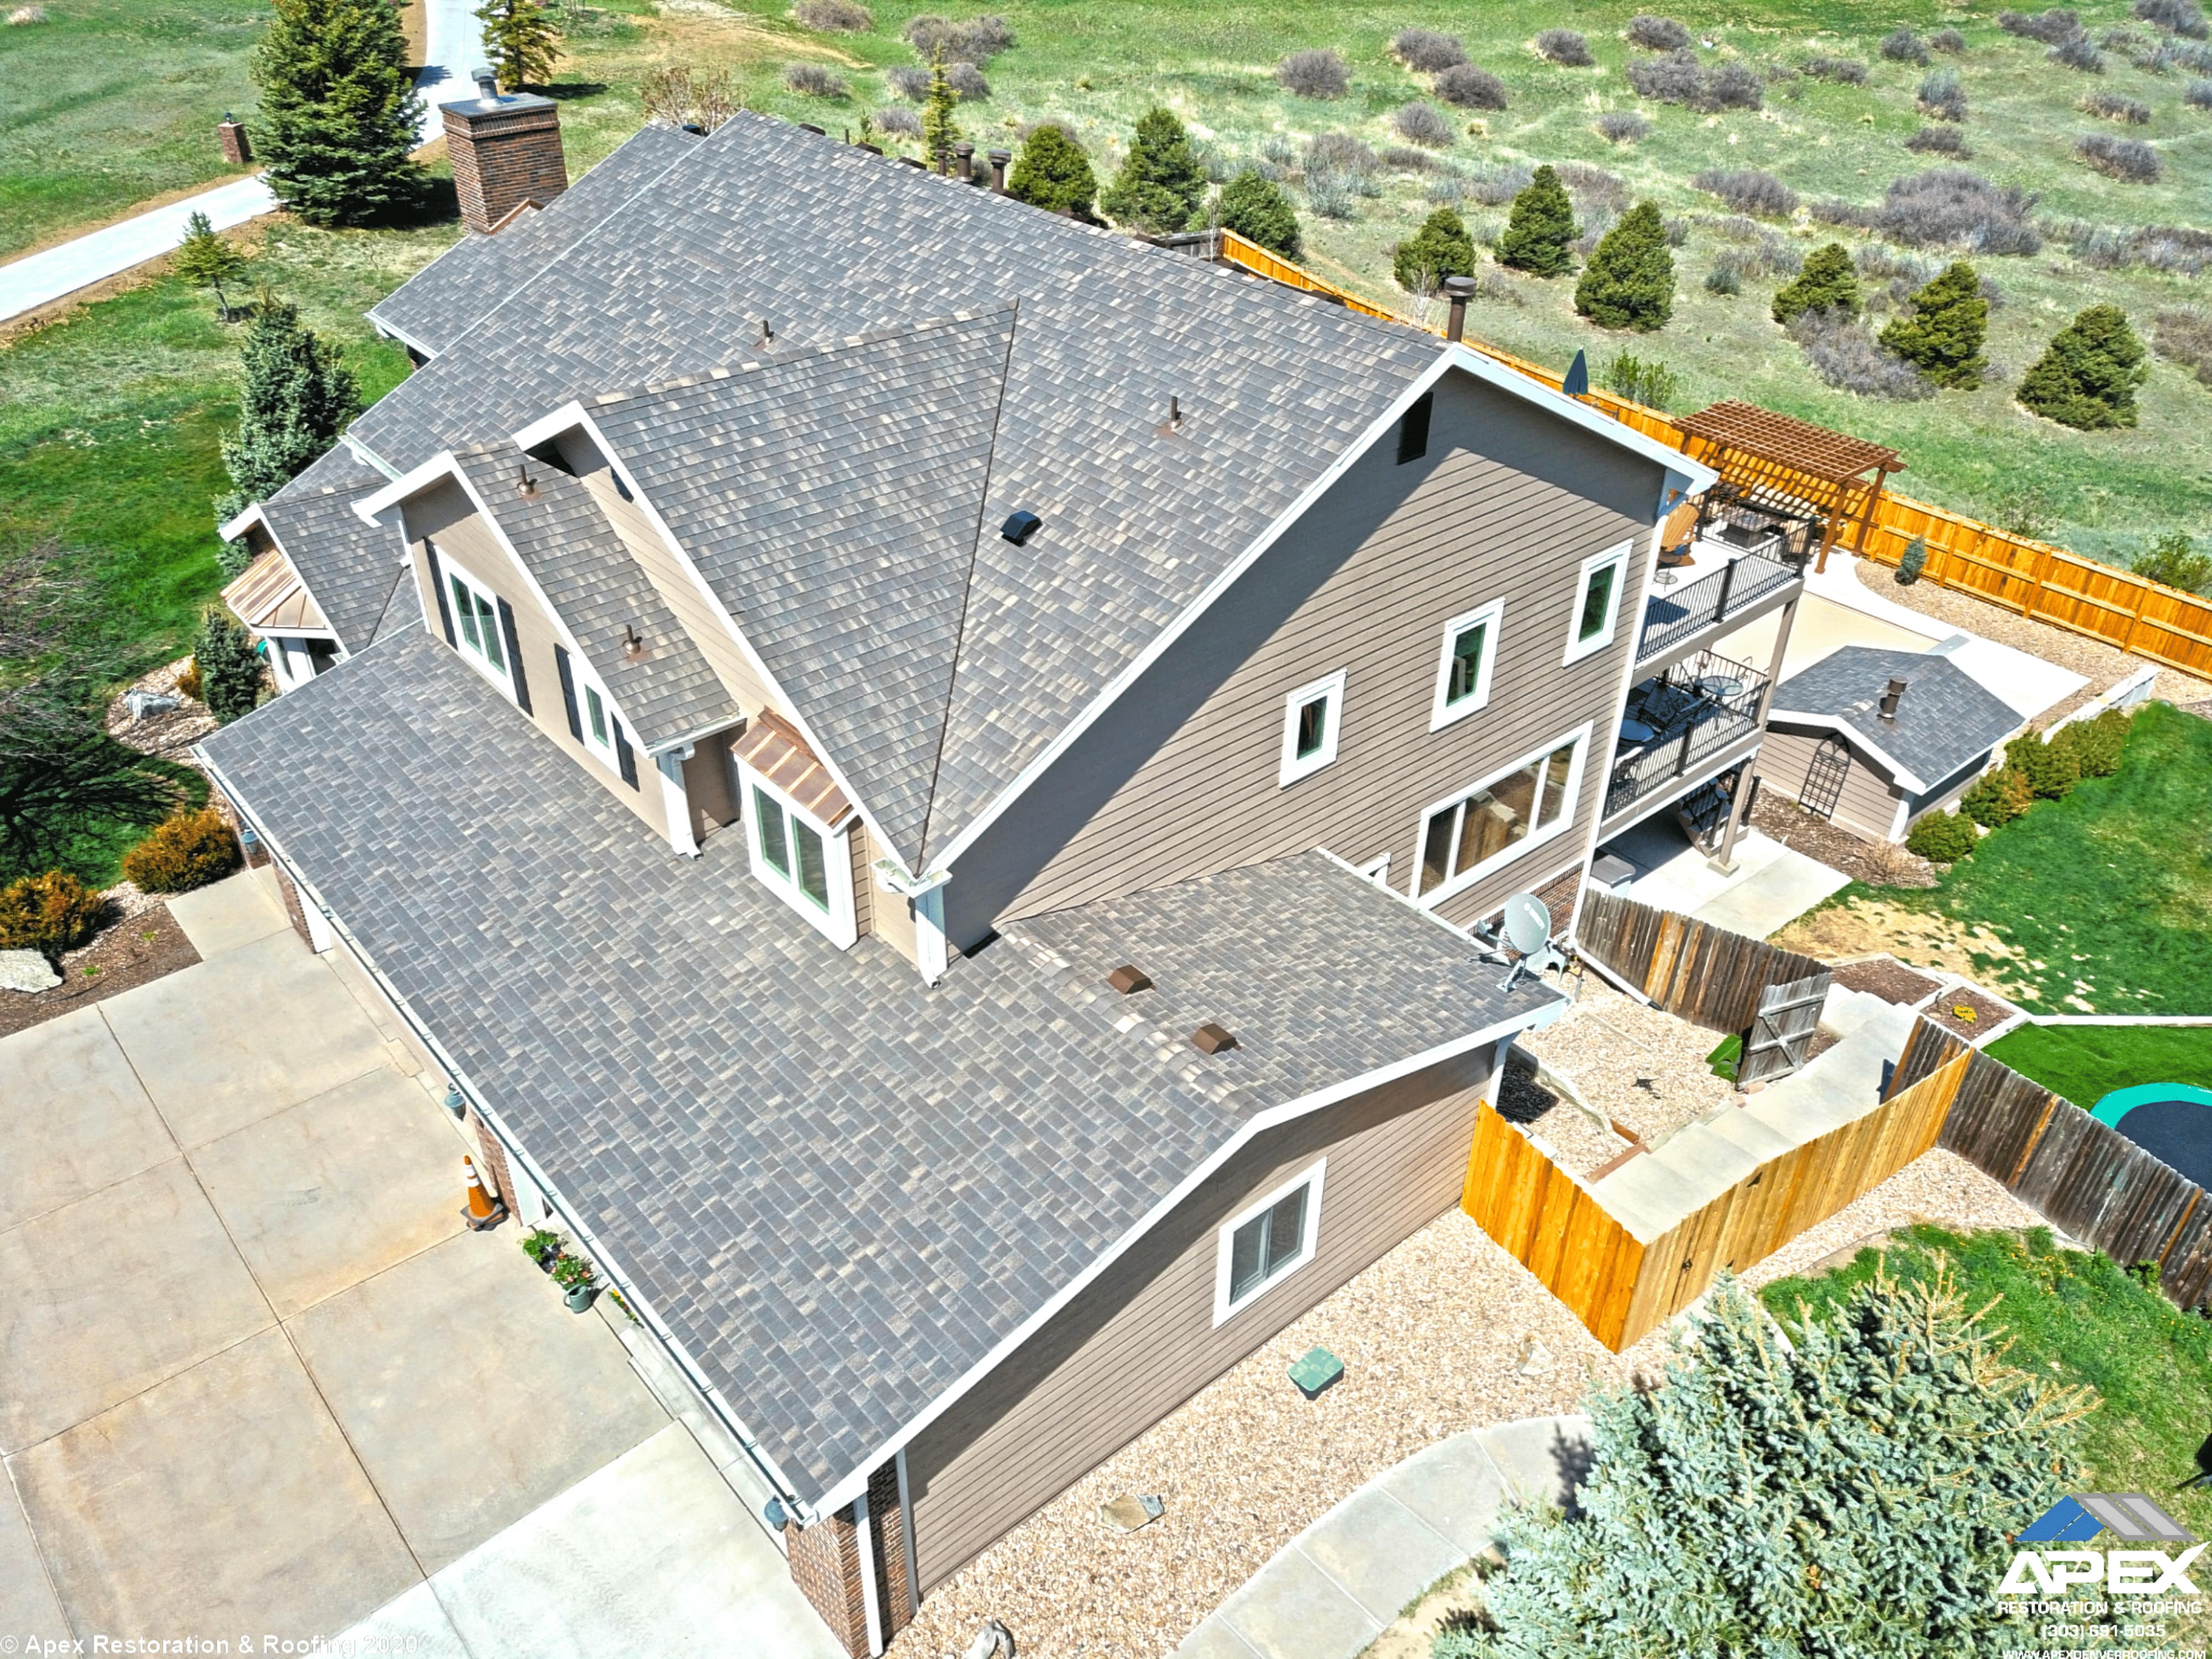 Colorado Roof Transformation with F Wave Synthetic Hand-Split Shake Shingles - Castlewood Brown